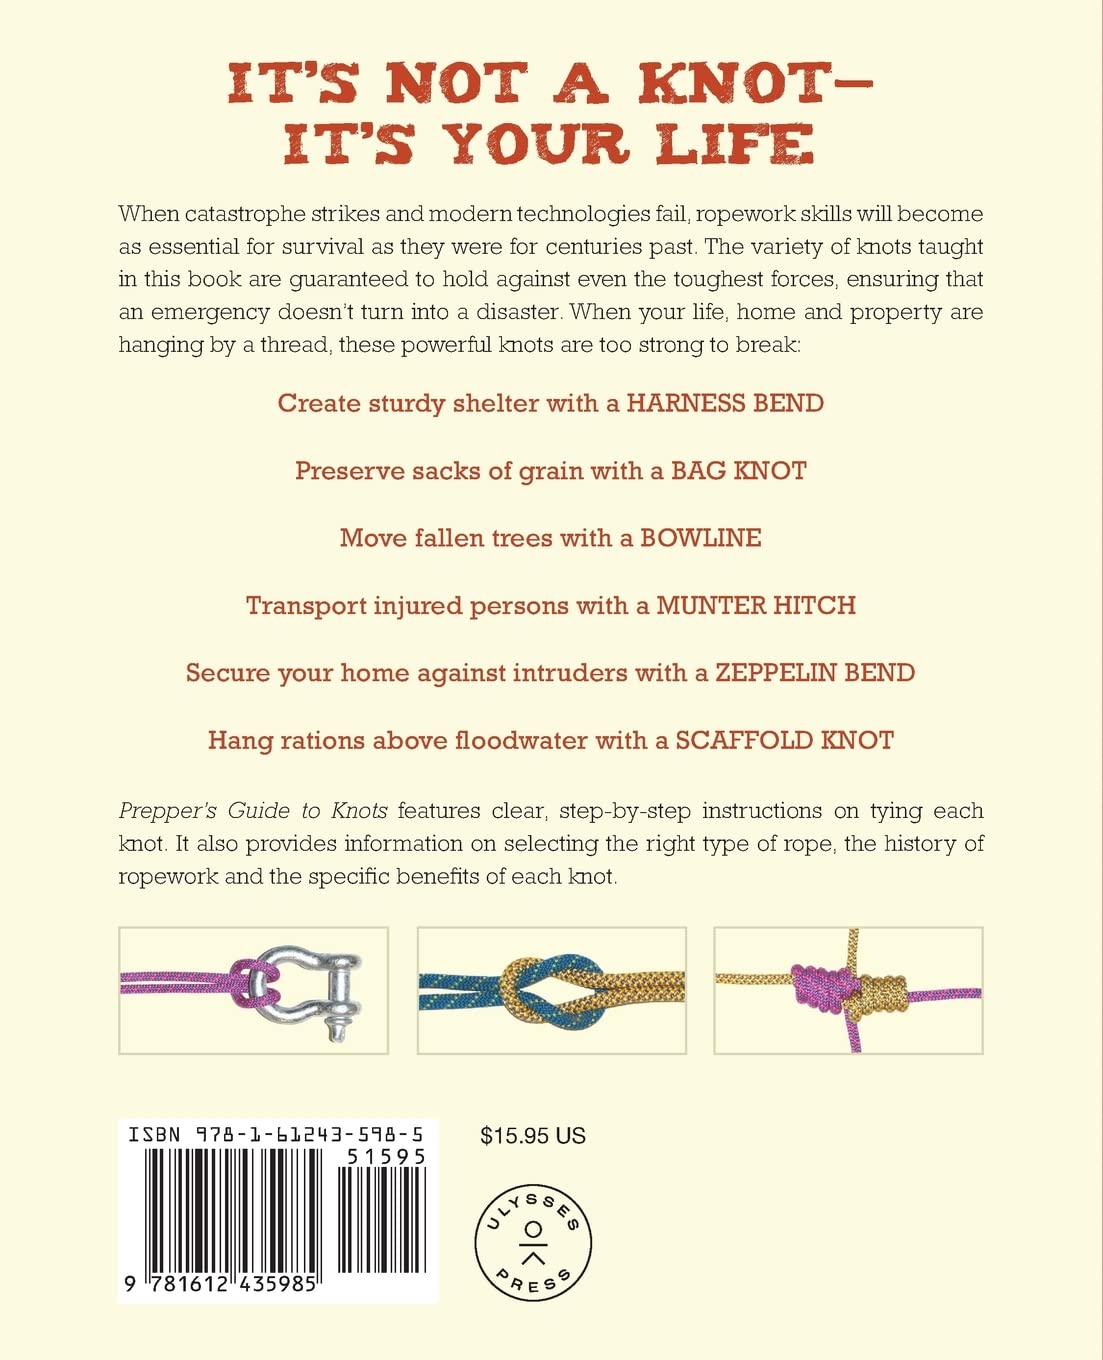 Prepper's Guide To Knots : The 100 Most Useful Tying Techniques for Surviving any Disaster Book